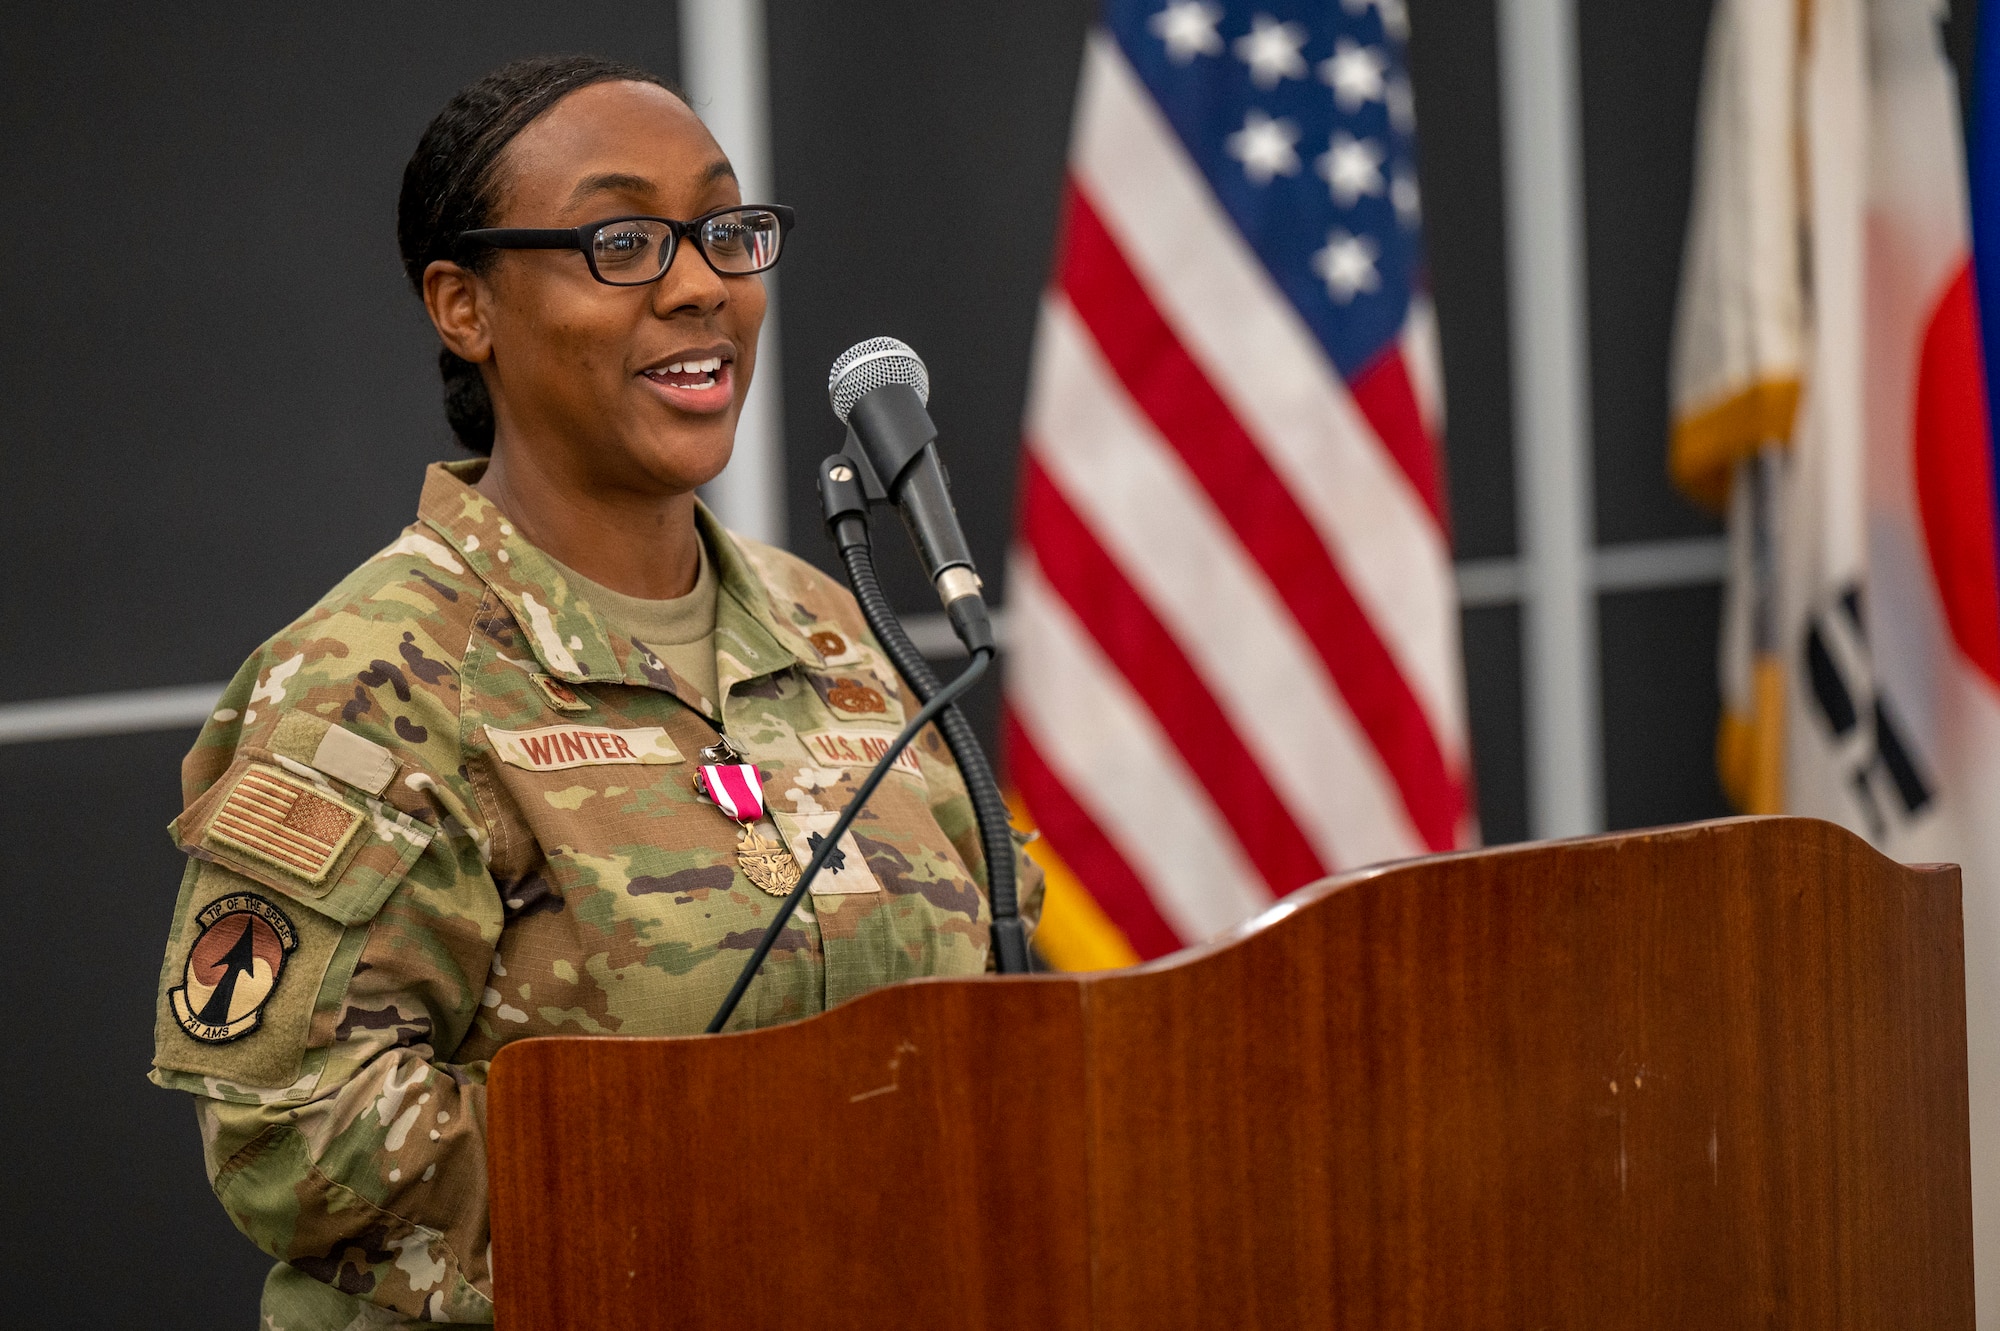 U.S. Air Force Lt. Col. Sabrina Winter, 731st Air Mobility Squadron outgoing commander, provides a speech during a change of command at Osan Air Base, Republic of Korea, June 23, 2023. During the ceremony, Lt. Col. Luke Berreckman took command of the 731st AMS.  (U.S. Air Force photo by Senior Airman Aaron Edwards)